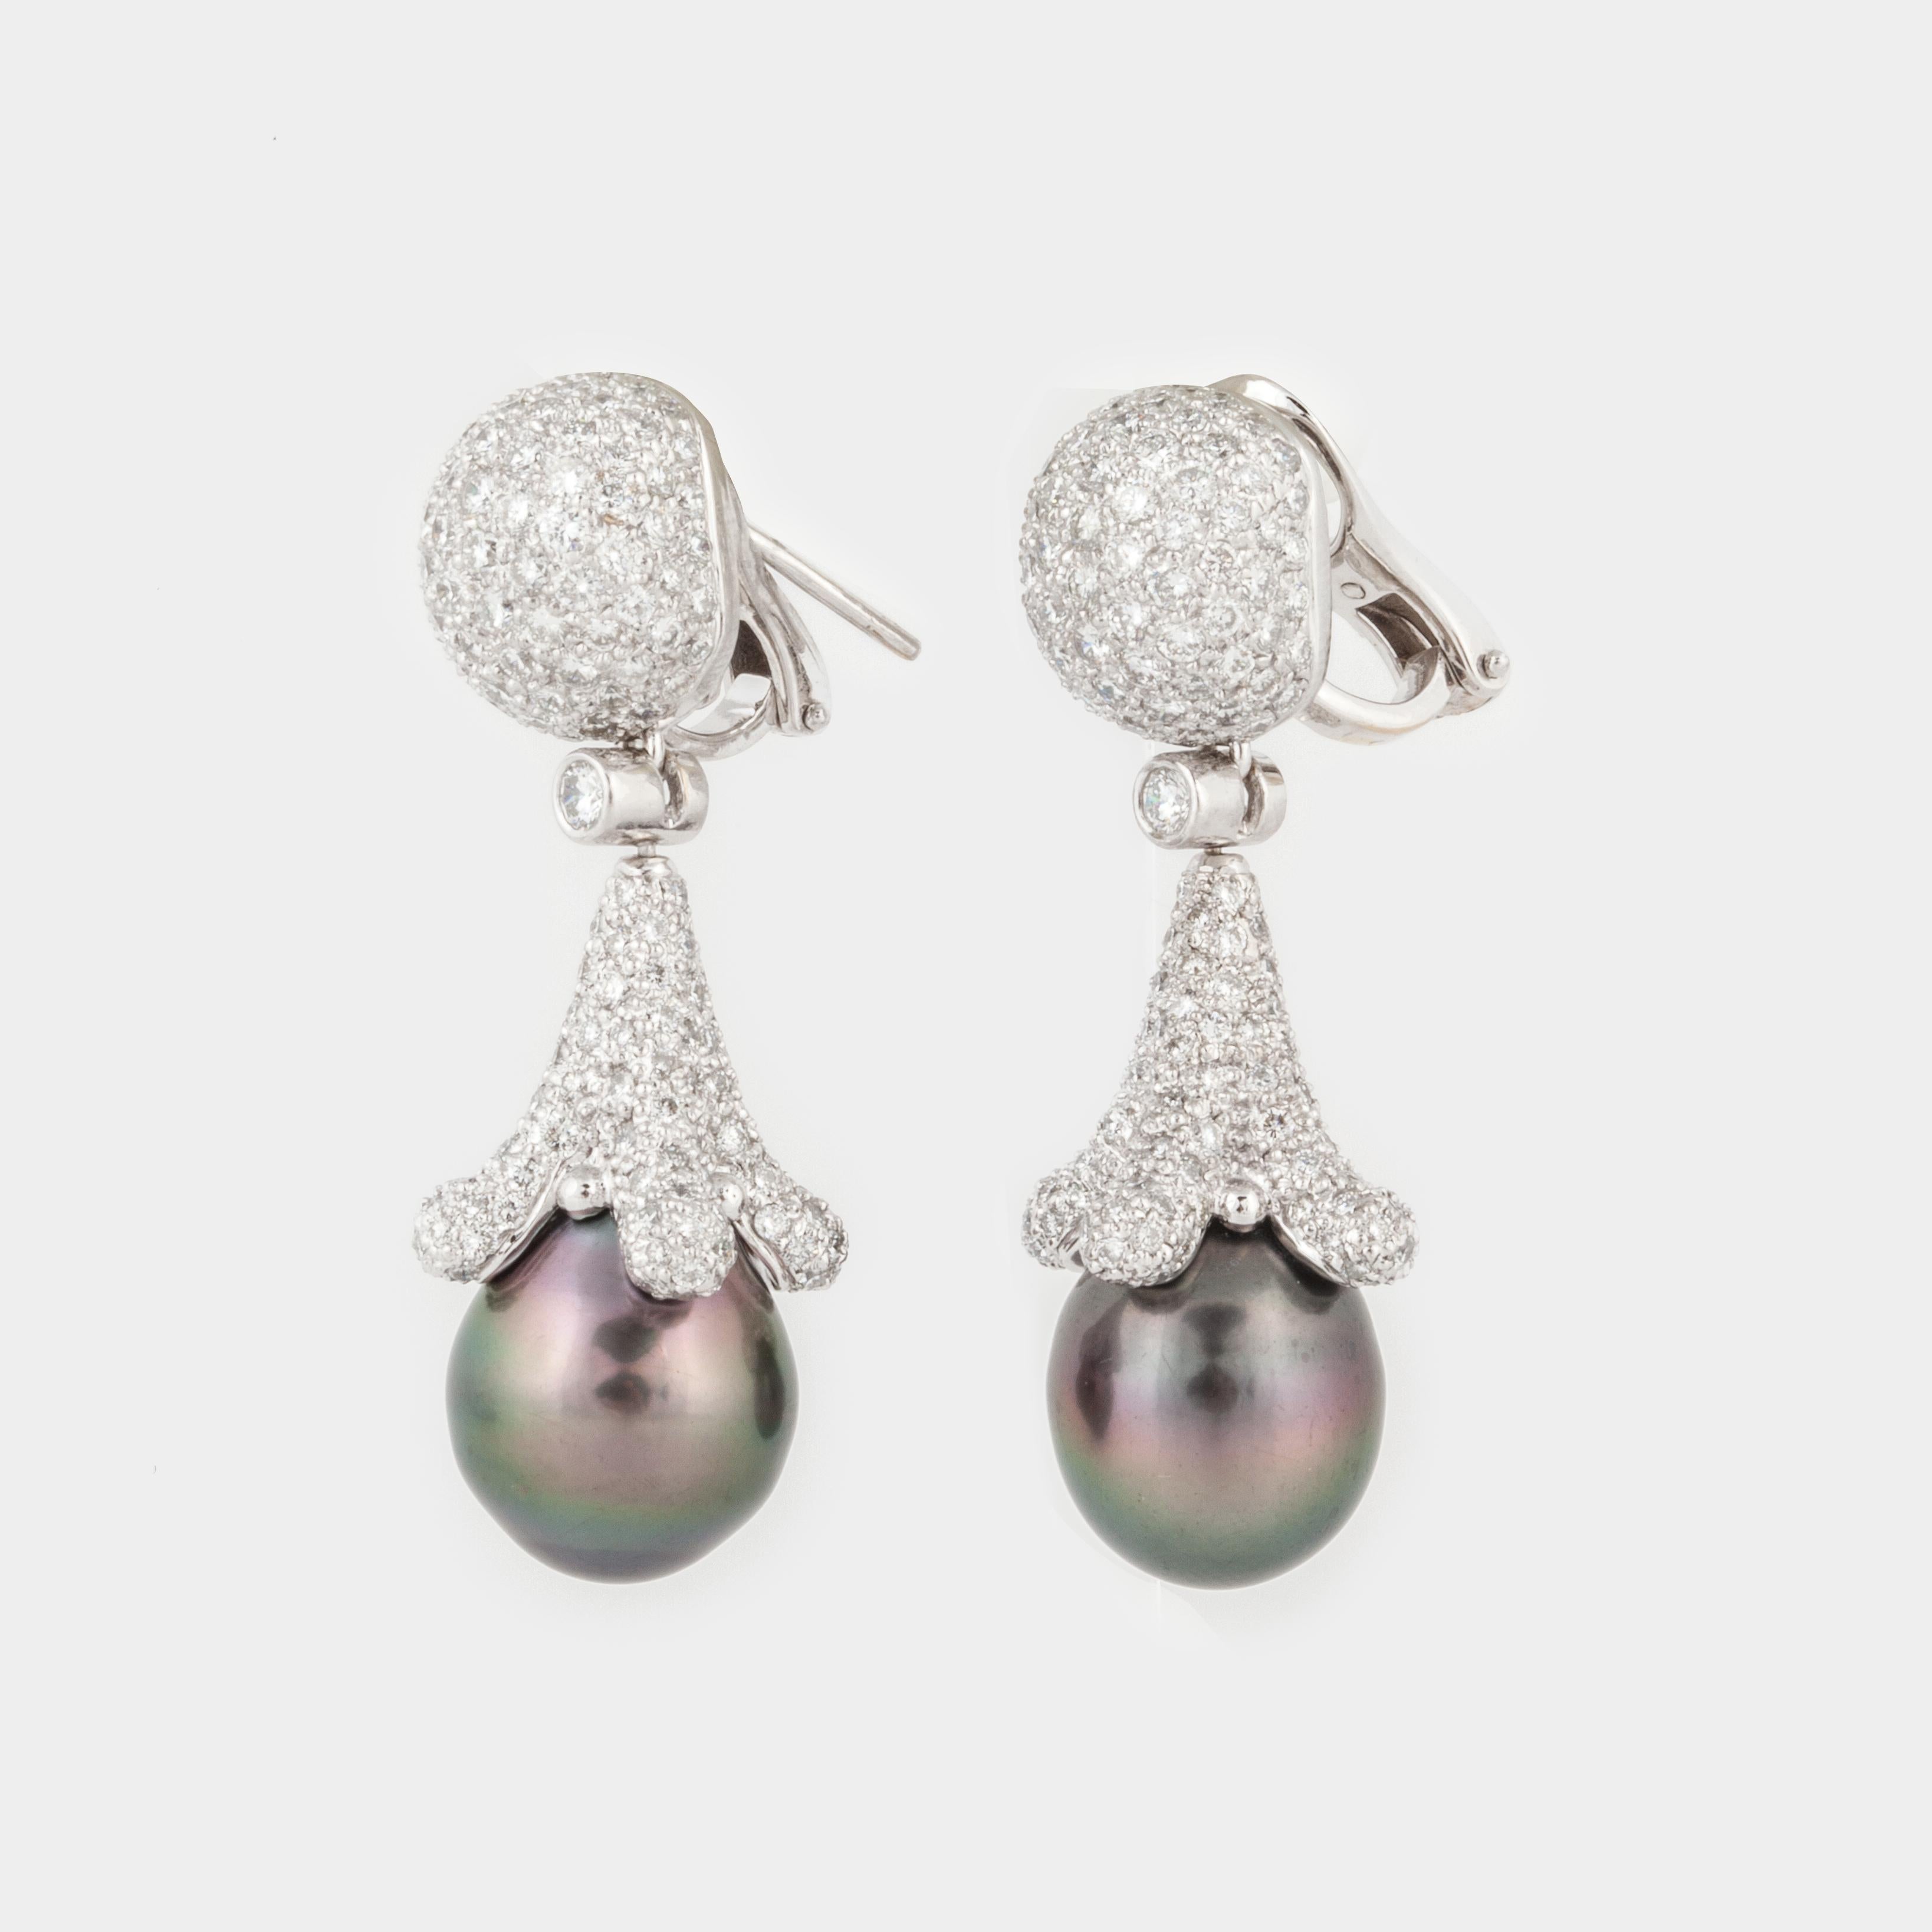 Cultured South Sea gray pearl earrings with diamonds in 18K white gold.  The South Sea pearls measure  11.5mm-14.5mm.  Additionally, there are 406 round diamonds with a total carat weight of 6.10; E-G color and VVS2-VS1 clarity.  The earrings